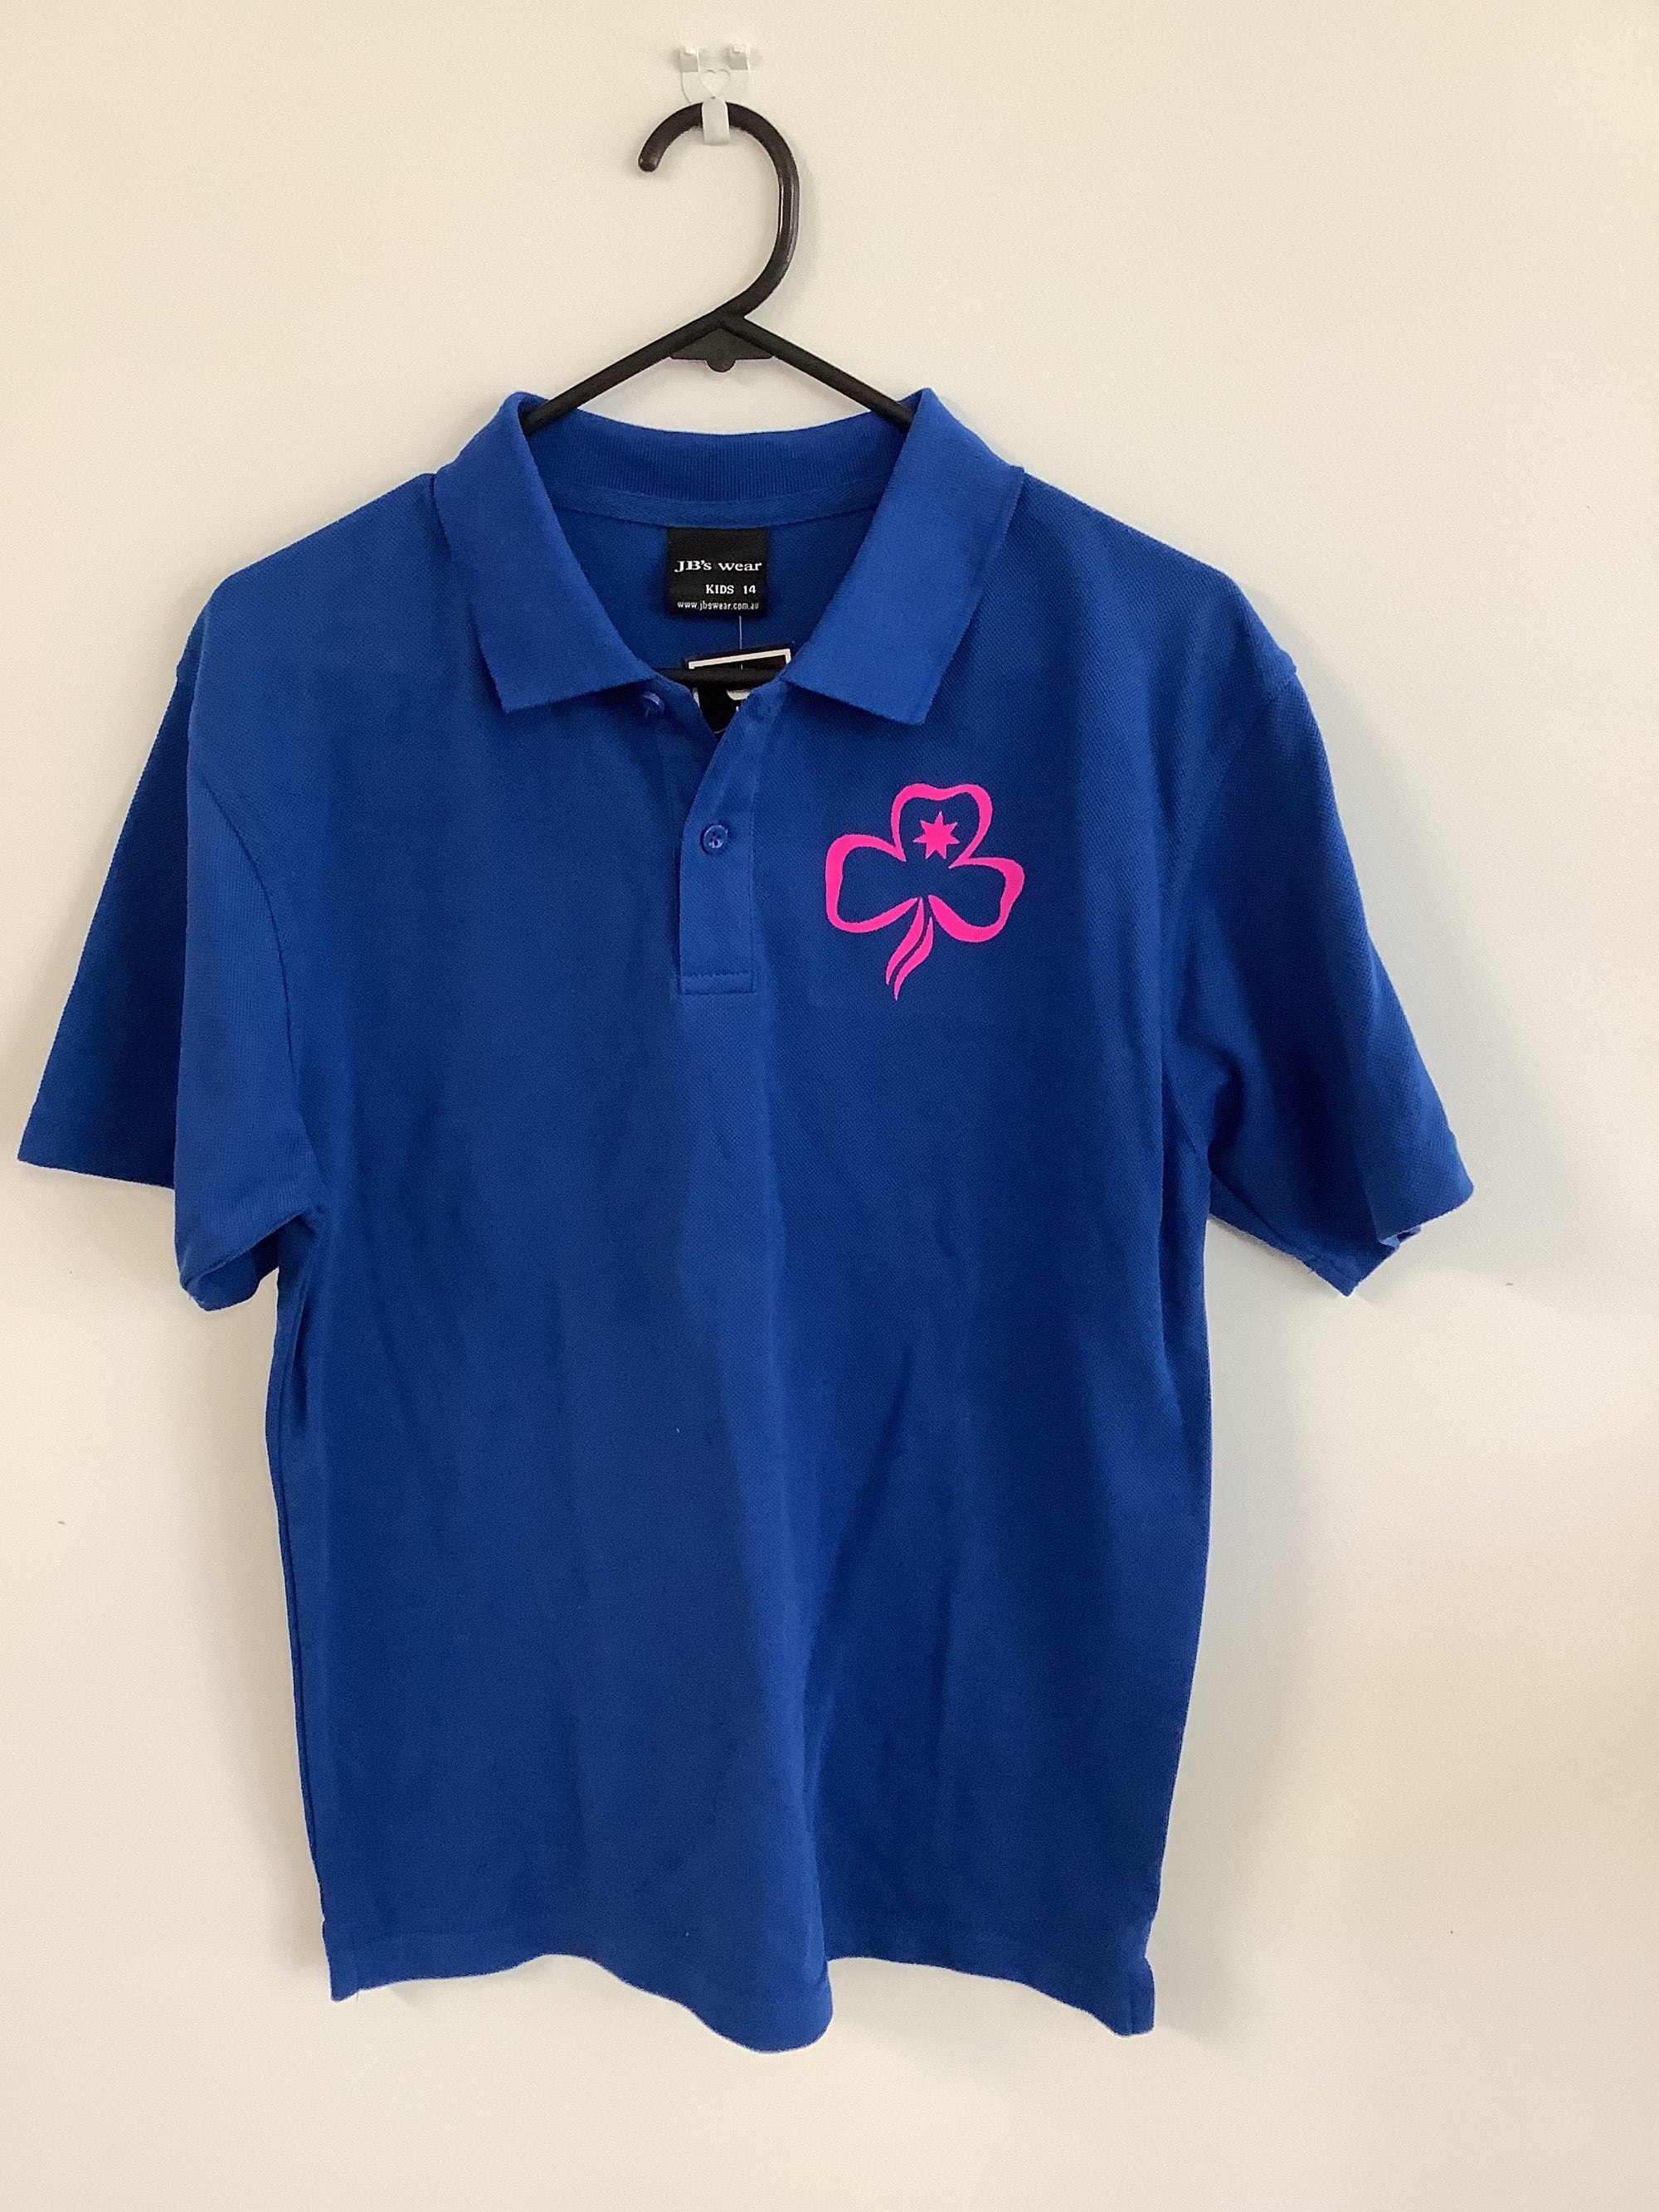 a navy polo shirt with a bright pink trefoil